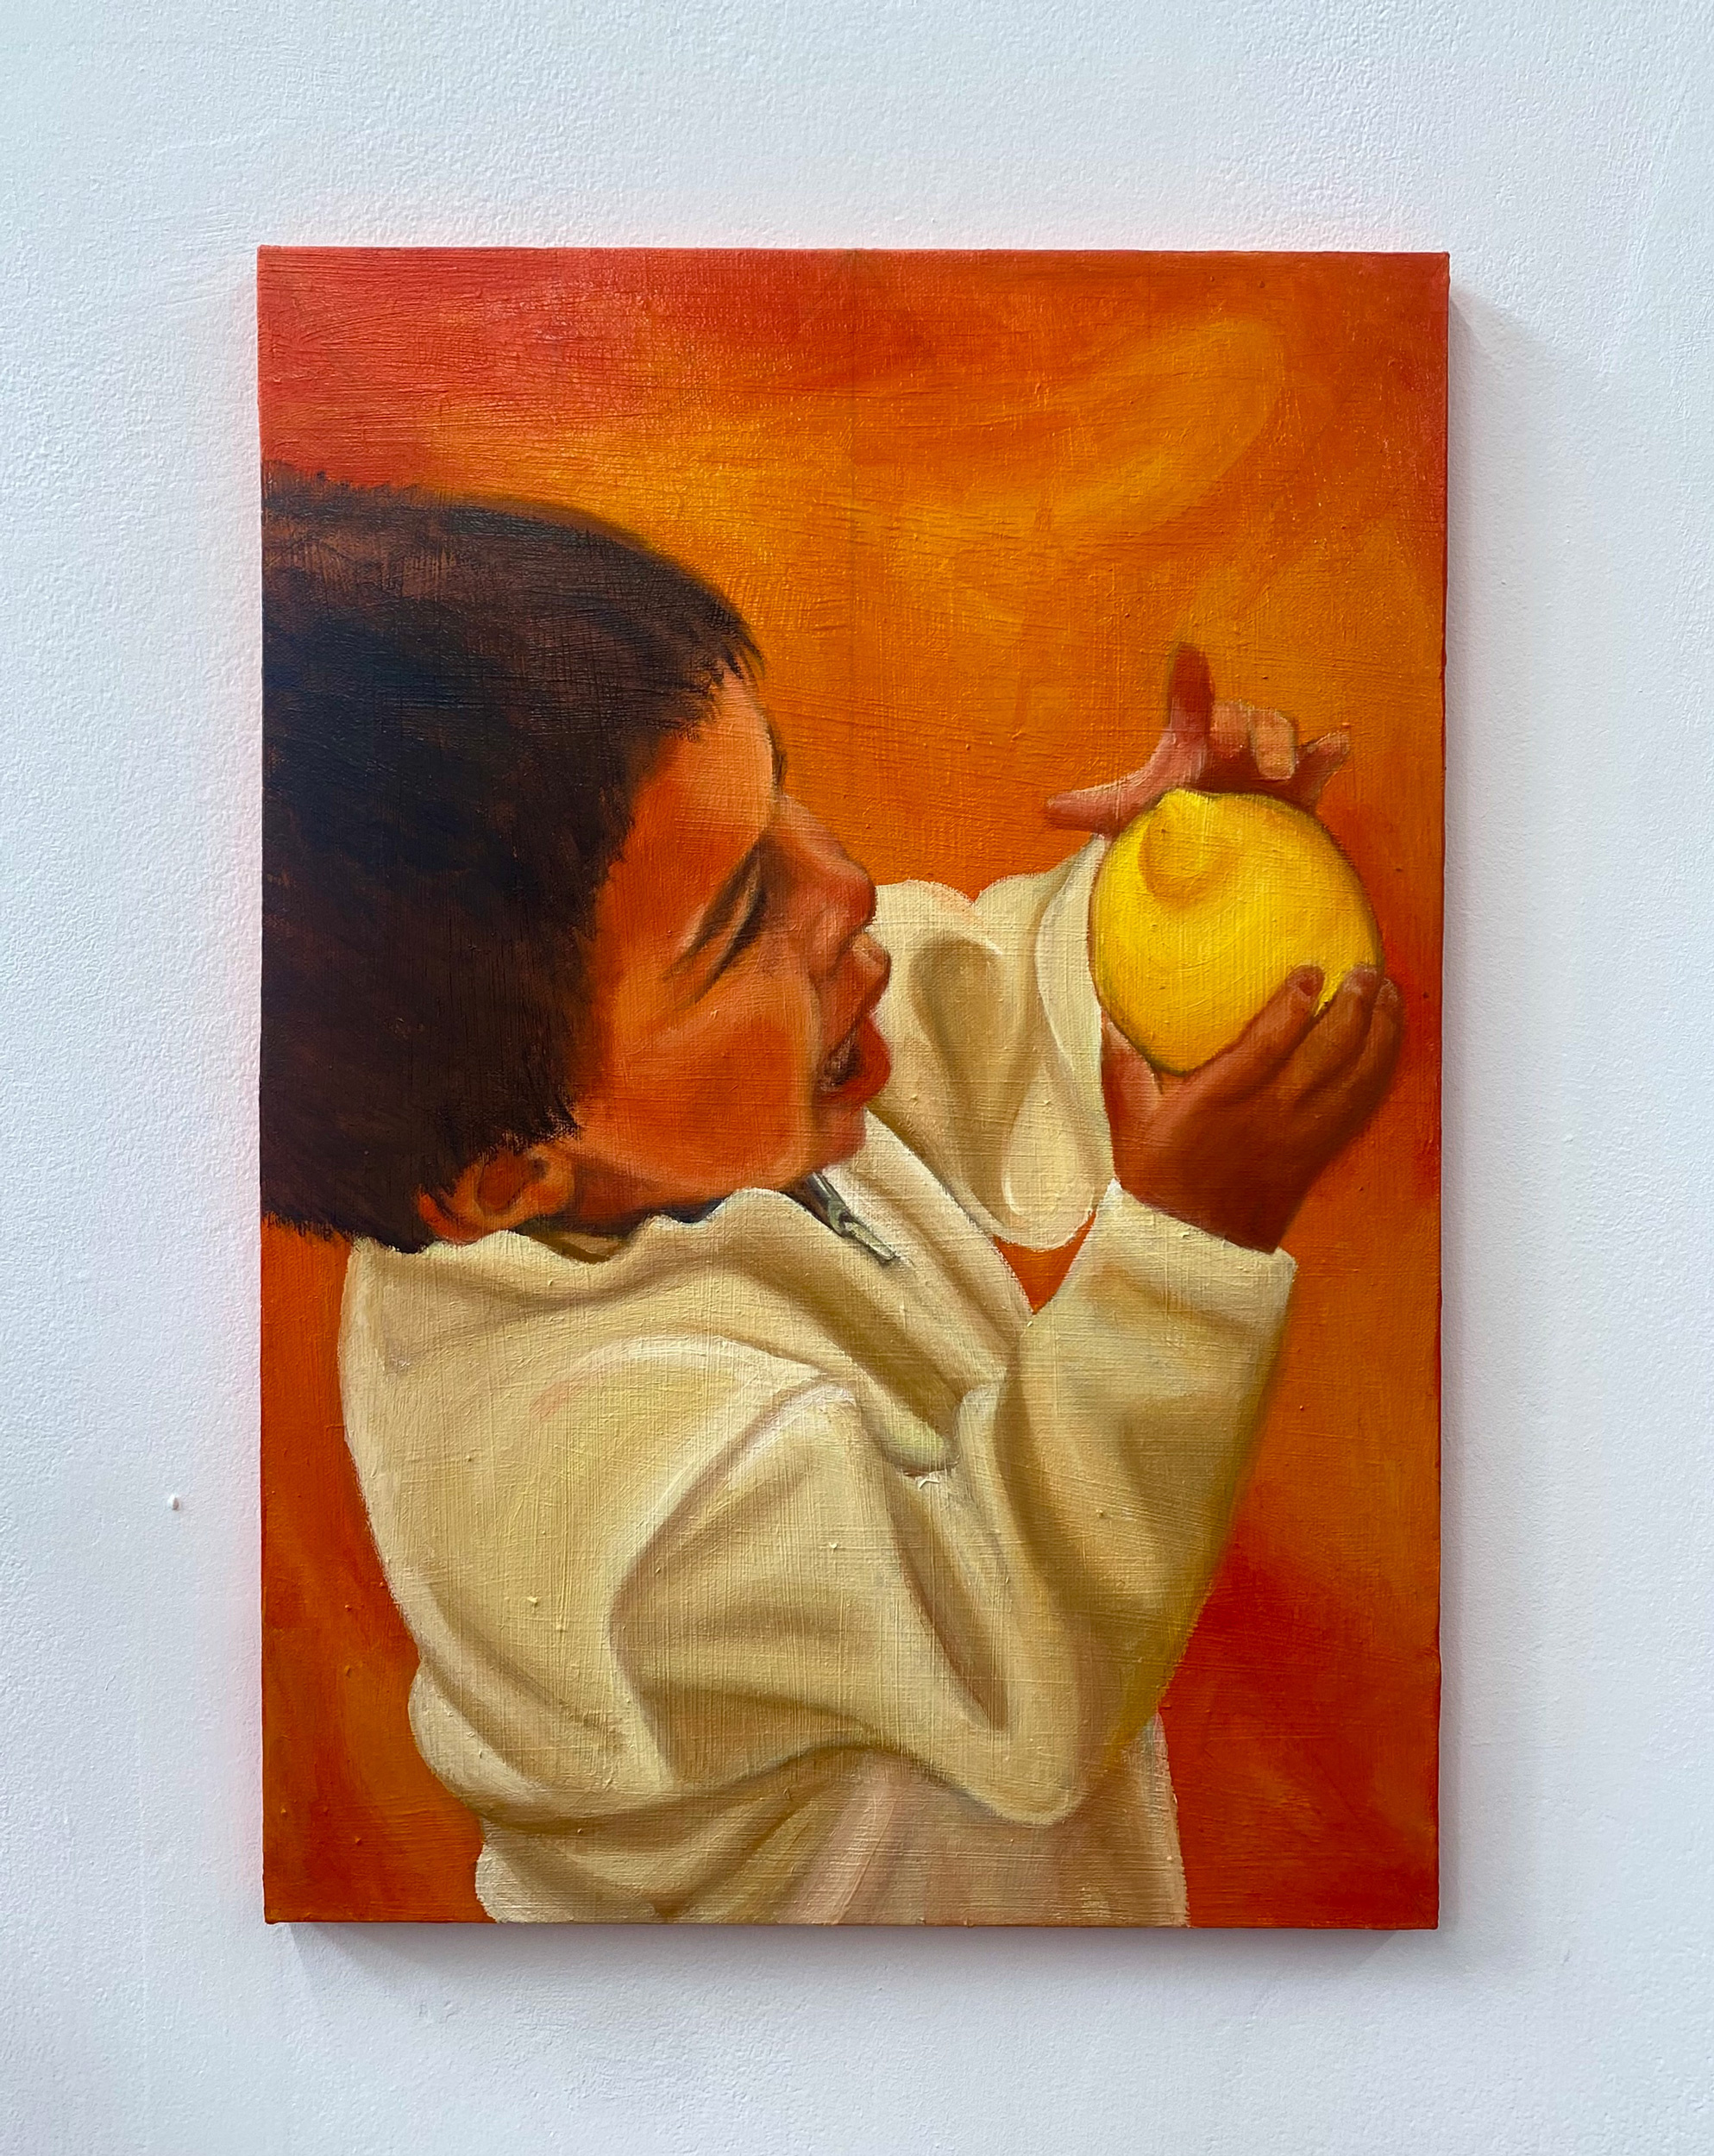 Oil painting on canvas of her brother as a child holding a lemon.